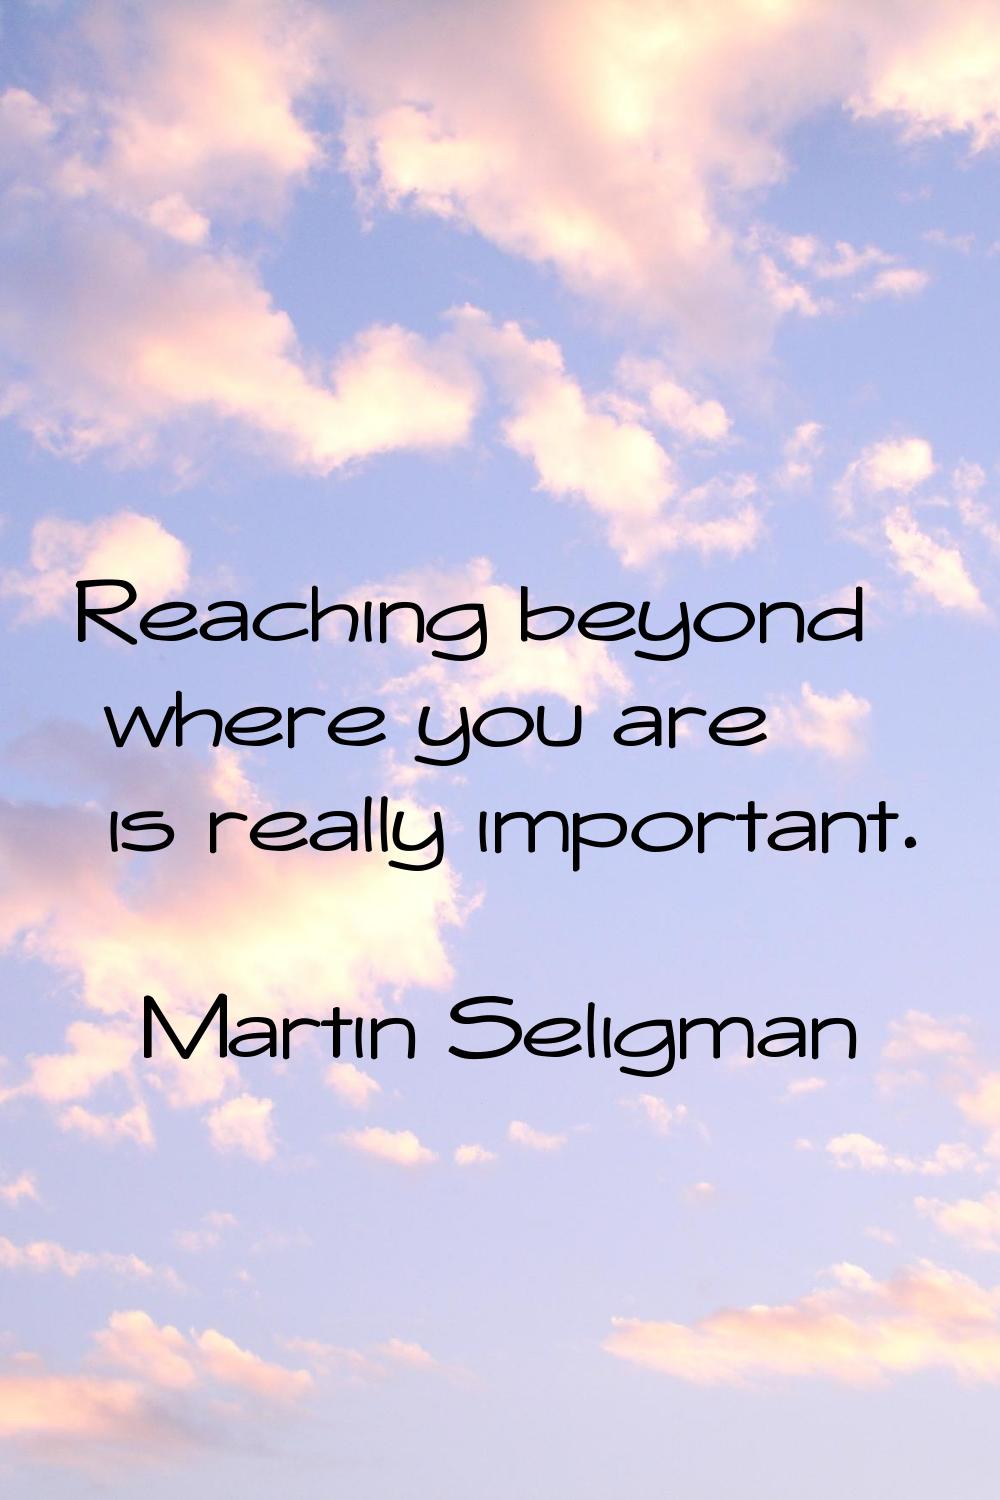 Reaching beyond where you are is really important.